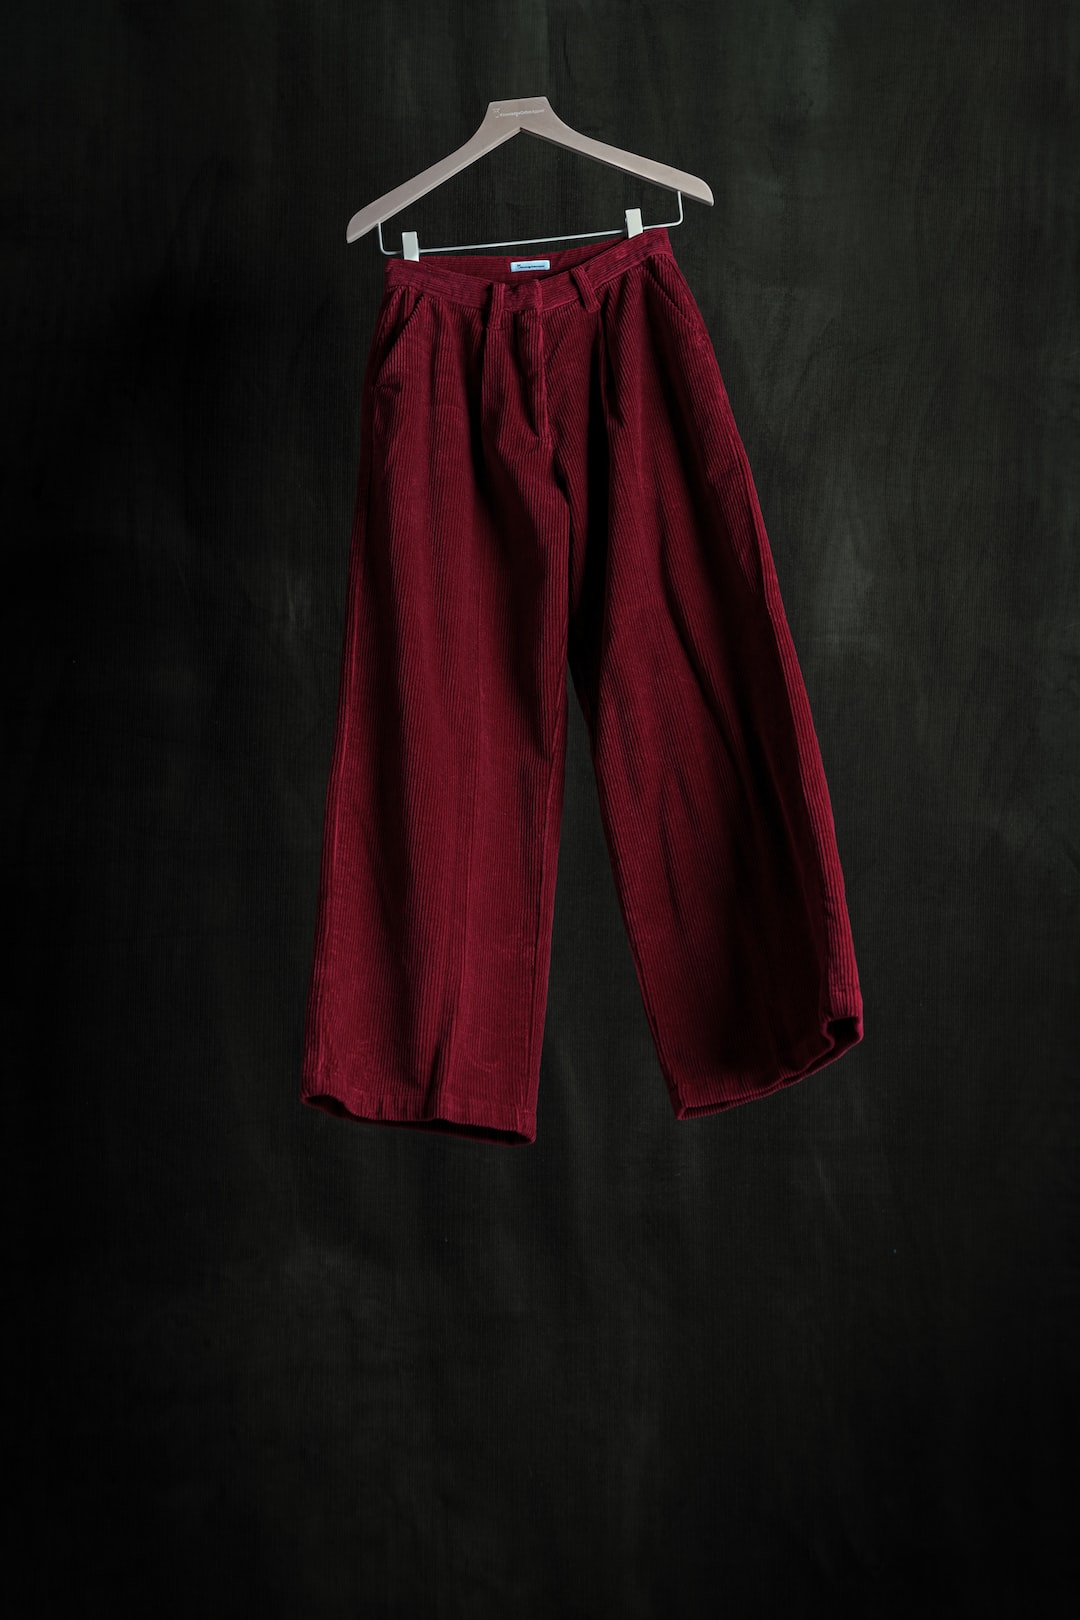 a pair of red pants hanging on a hanger